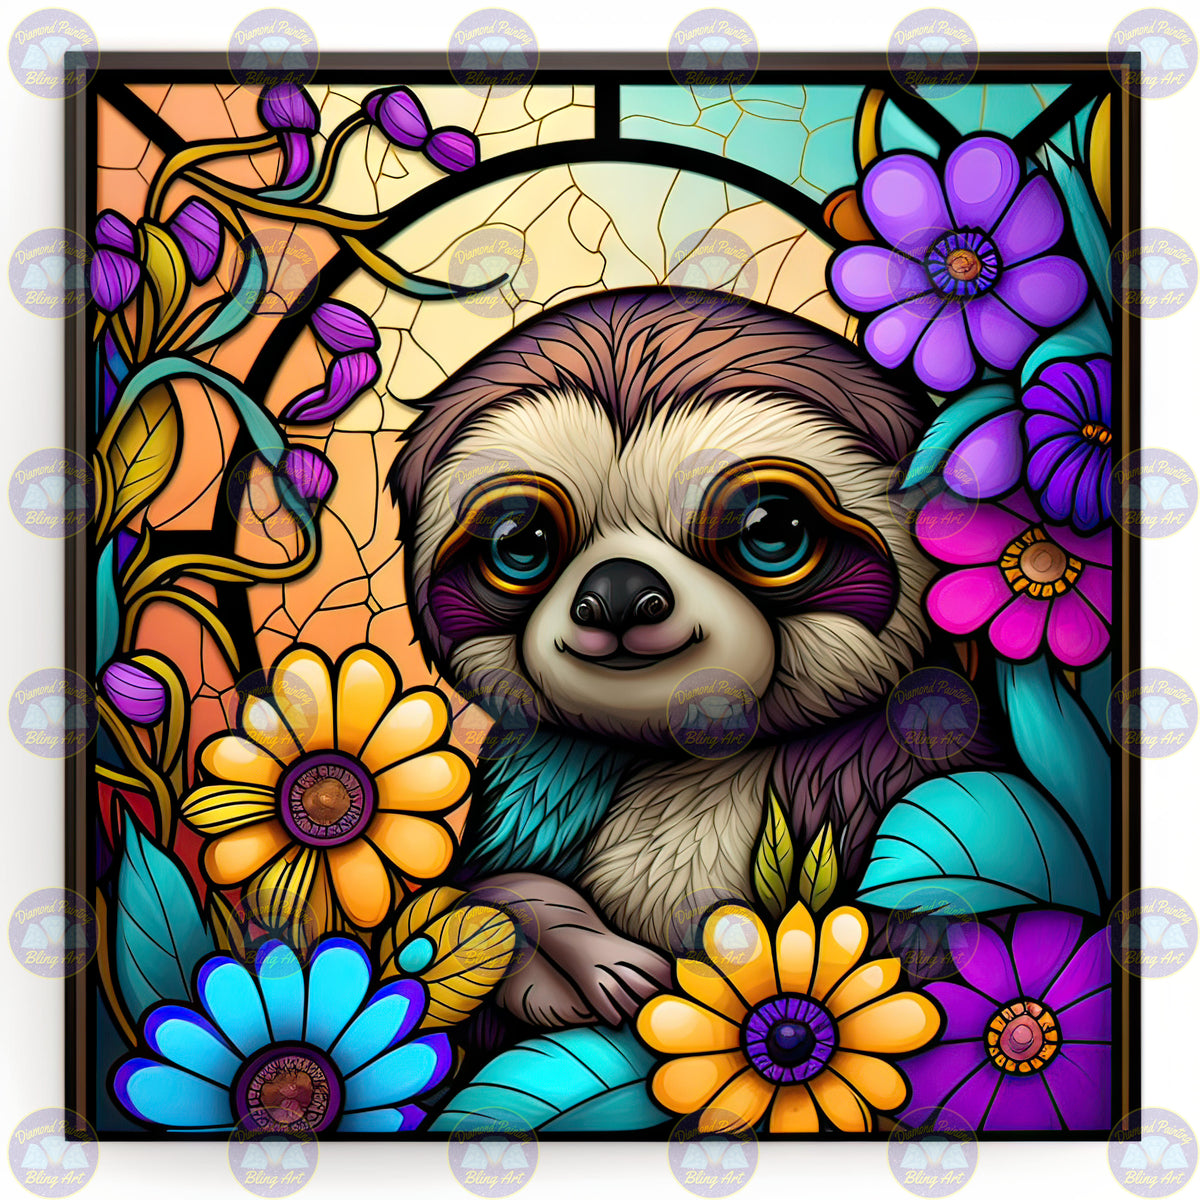 Diamond Painting Stained Glass Painting Art 9 004, Full Image - Painting